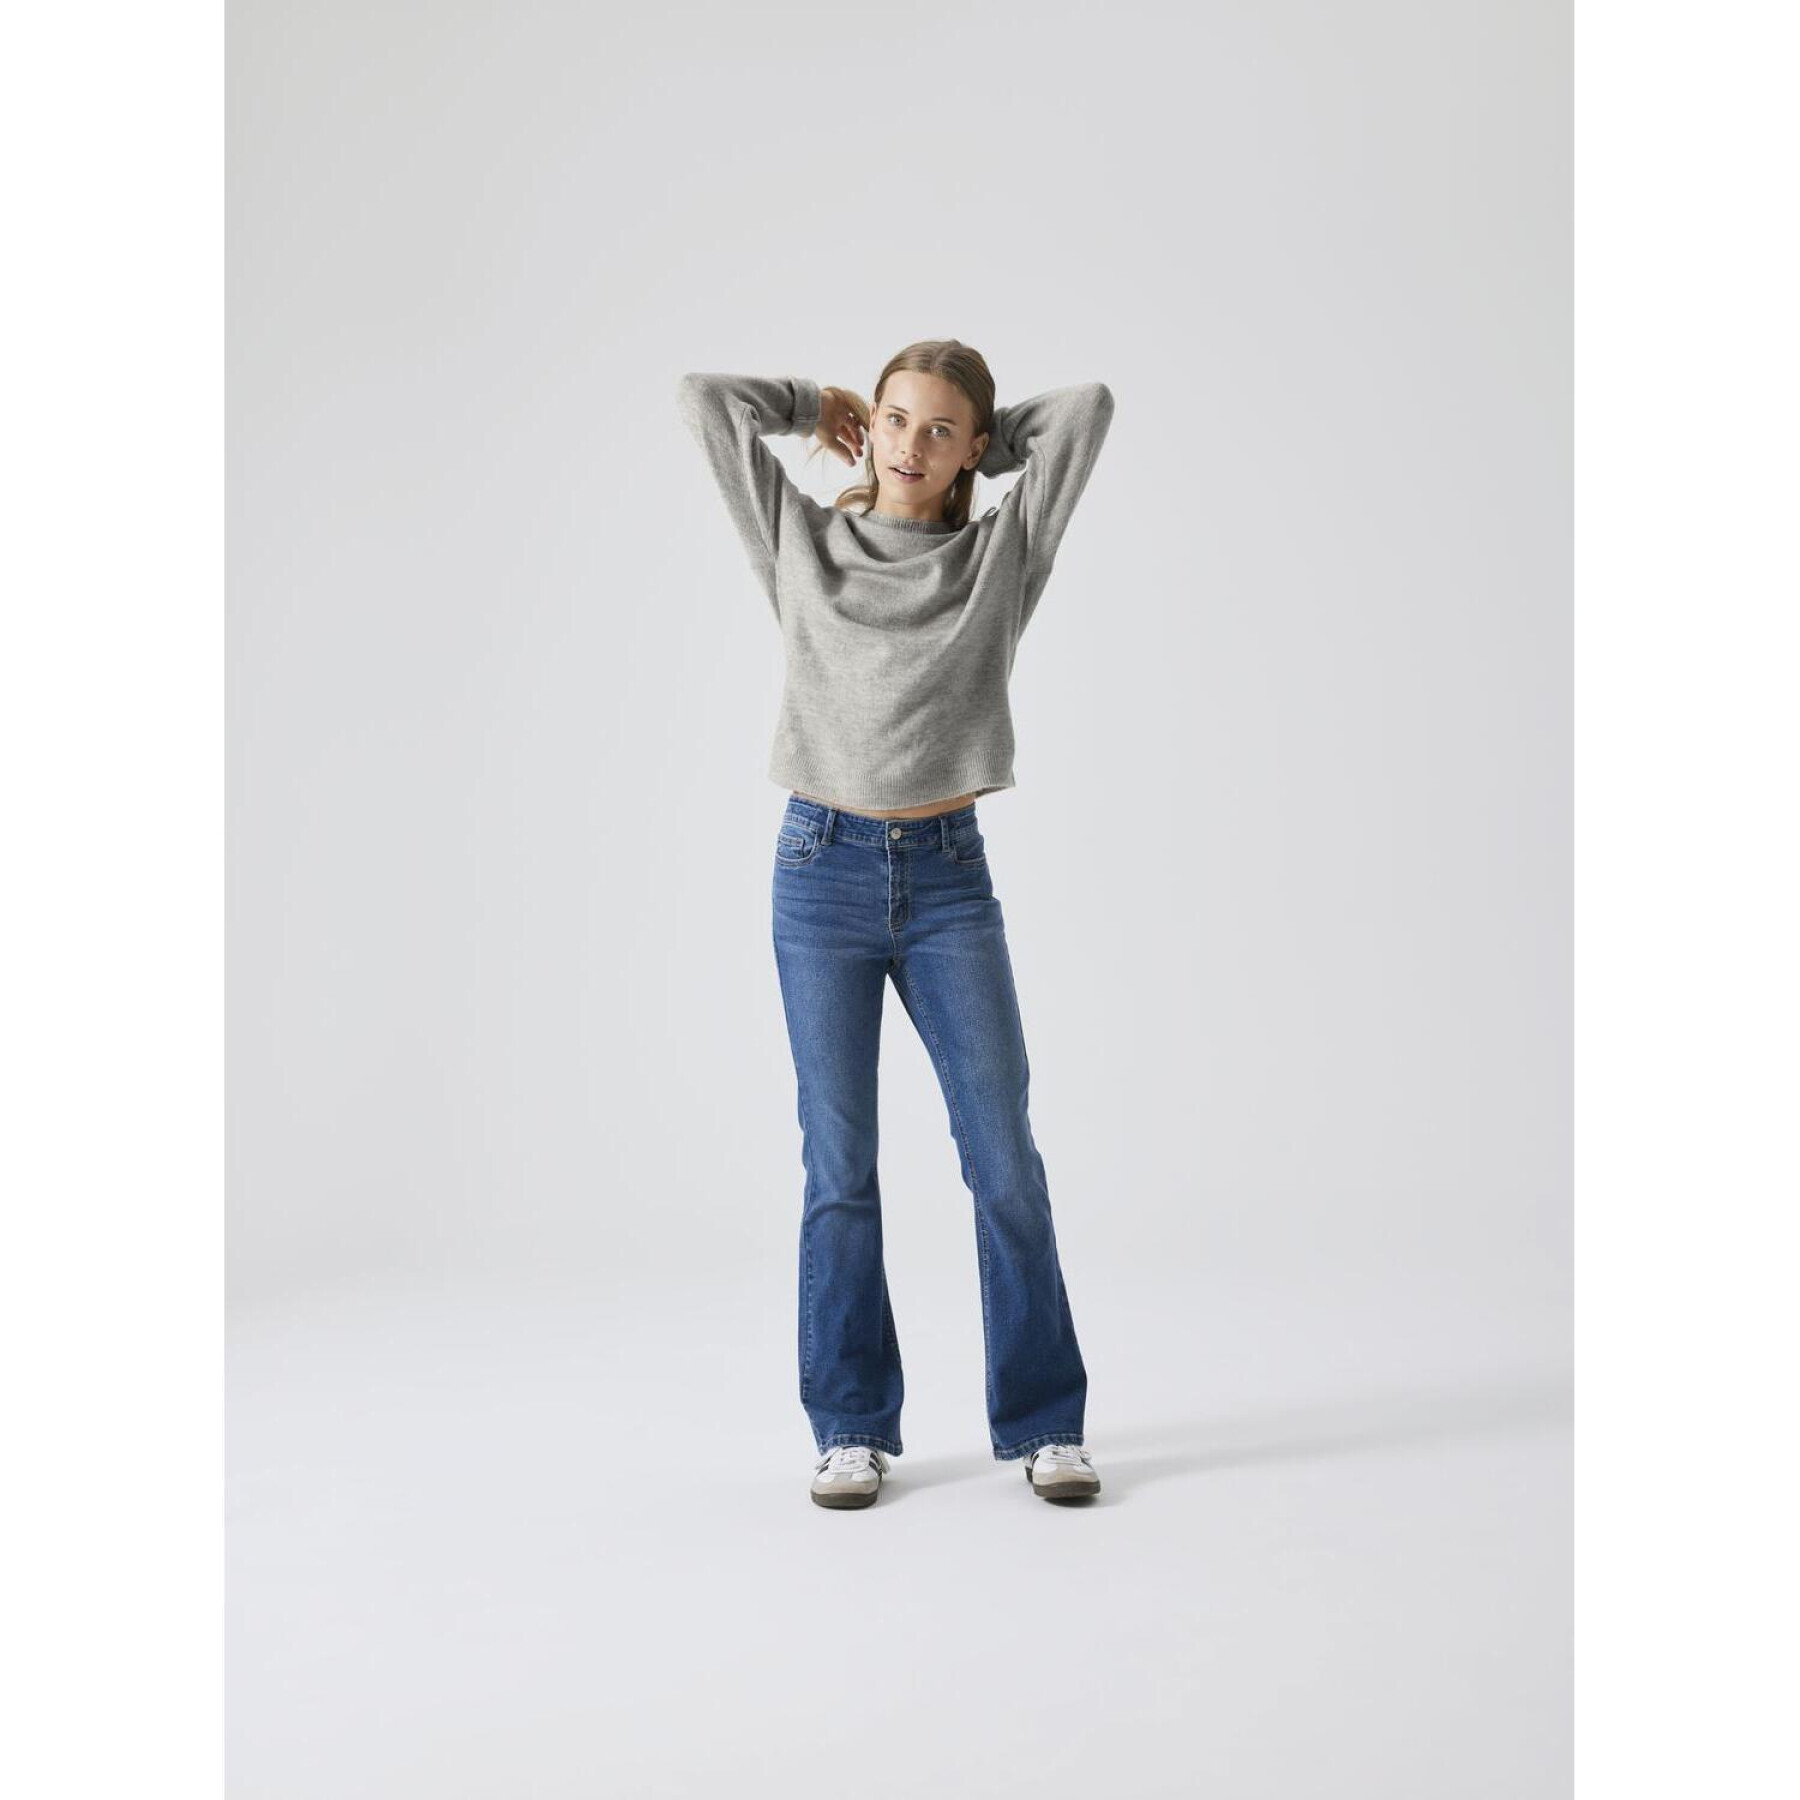 Jeans fille Name it Tarianne Bootcut